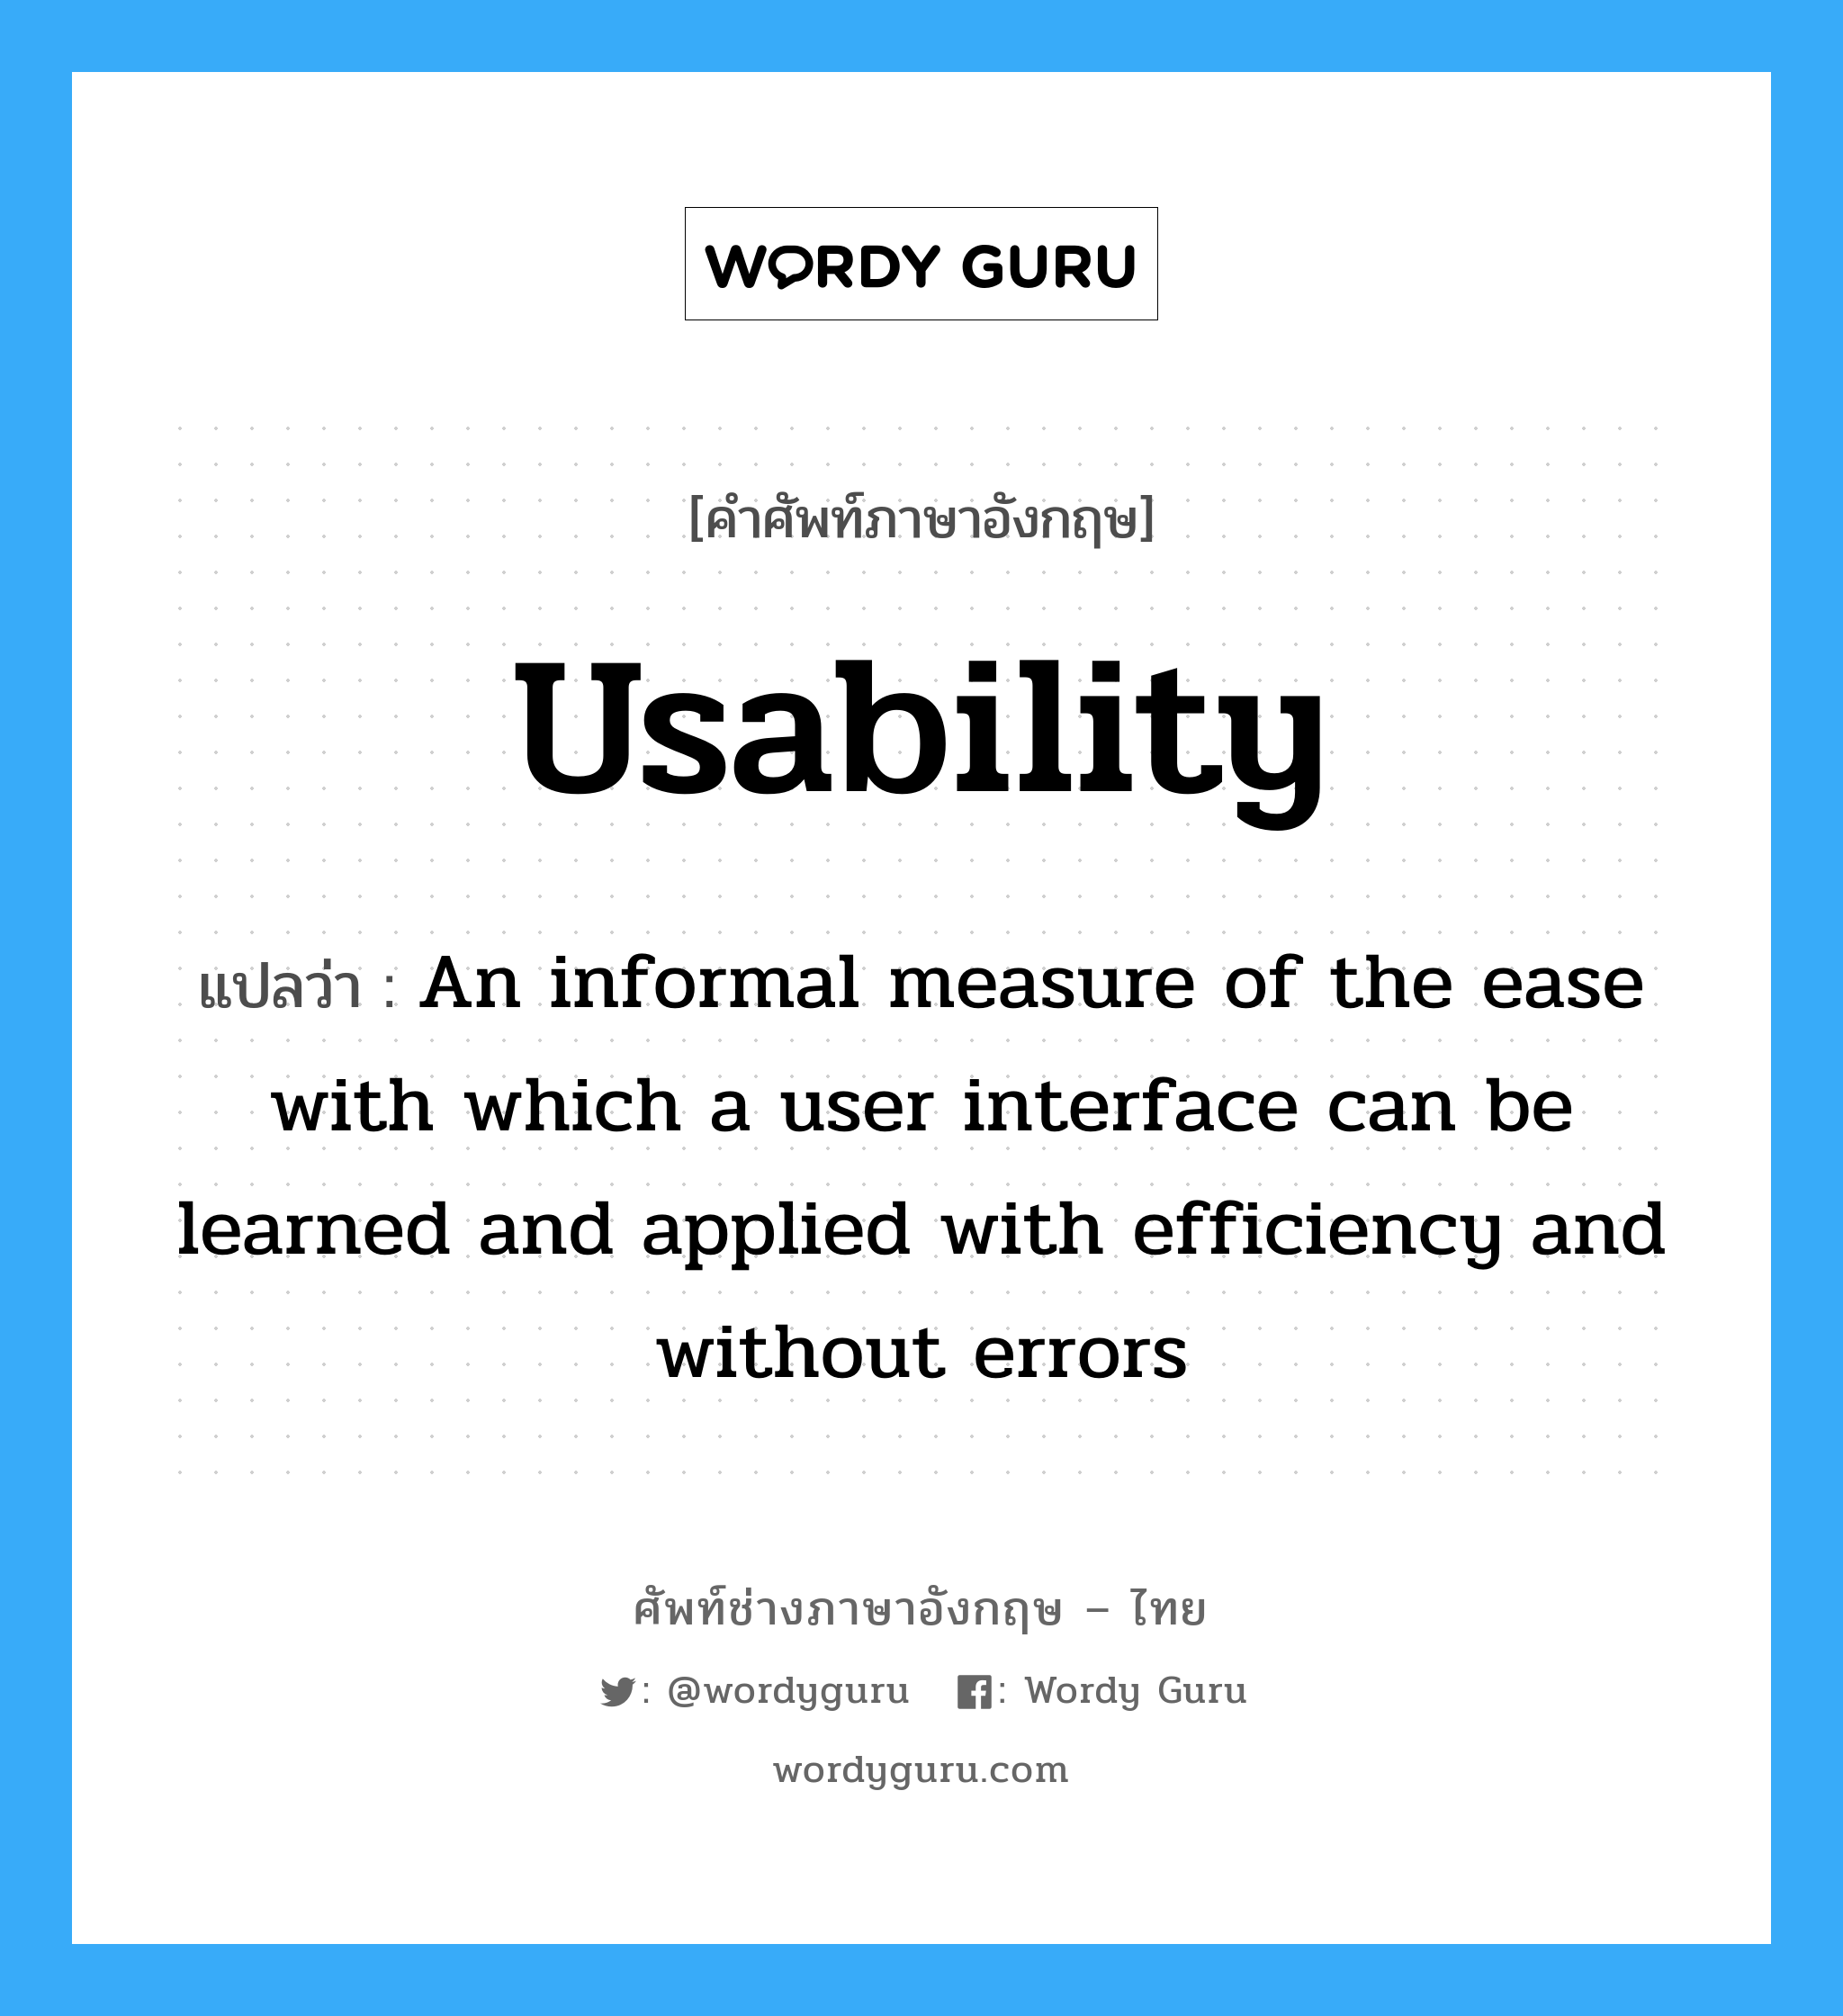 Usability แปลว่า?, คำศัพท์ช่างภาษาอังกฤษ - ไทย Usability คำศัพท์ภาษาอังกฤษ Usability แปลว่า An informal measure of the ease with which a user interface can be learned and applied with efficiency and without errors